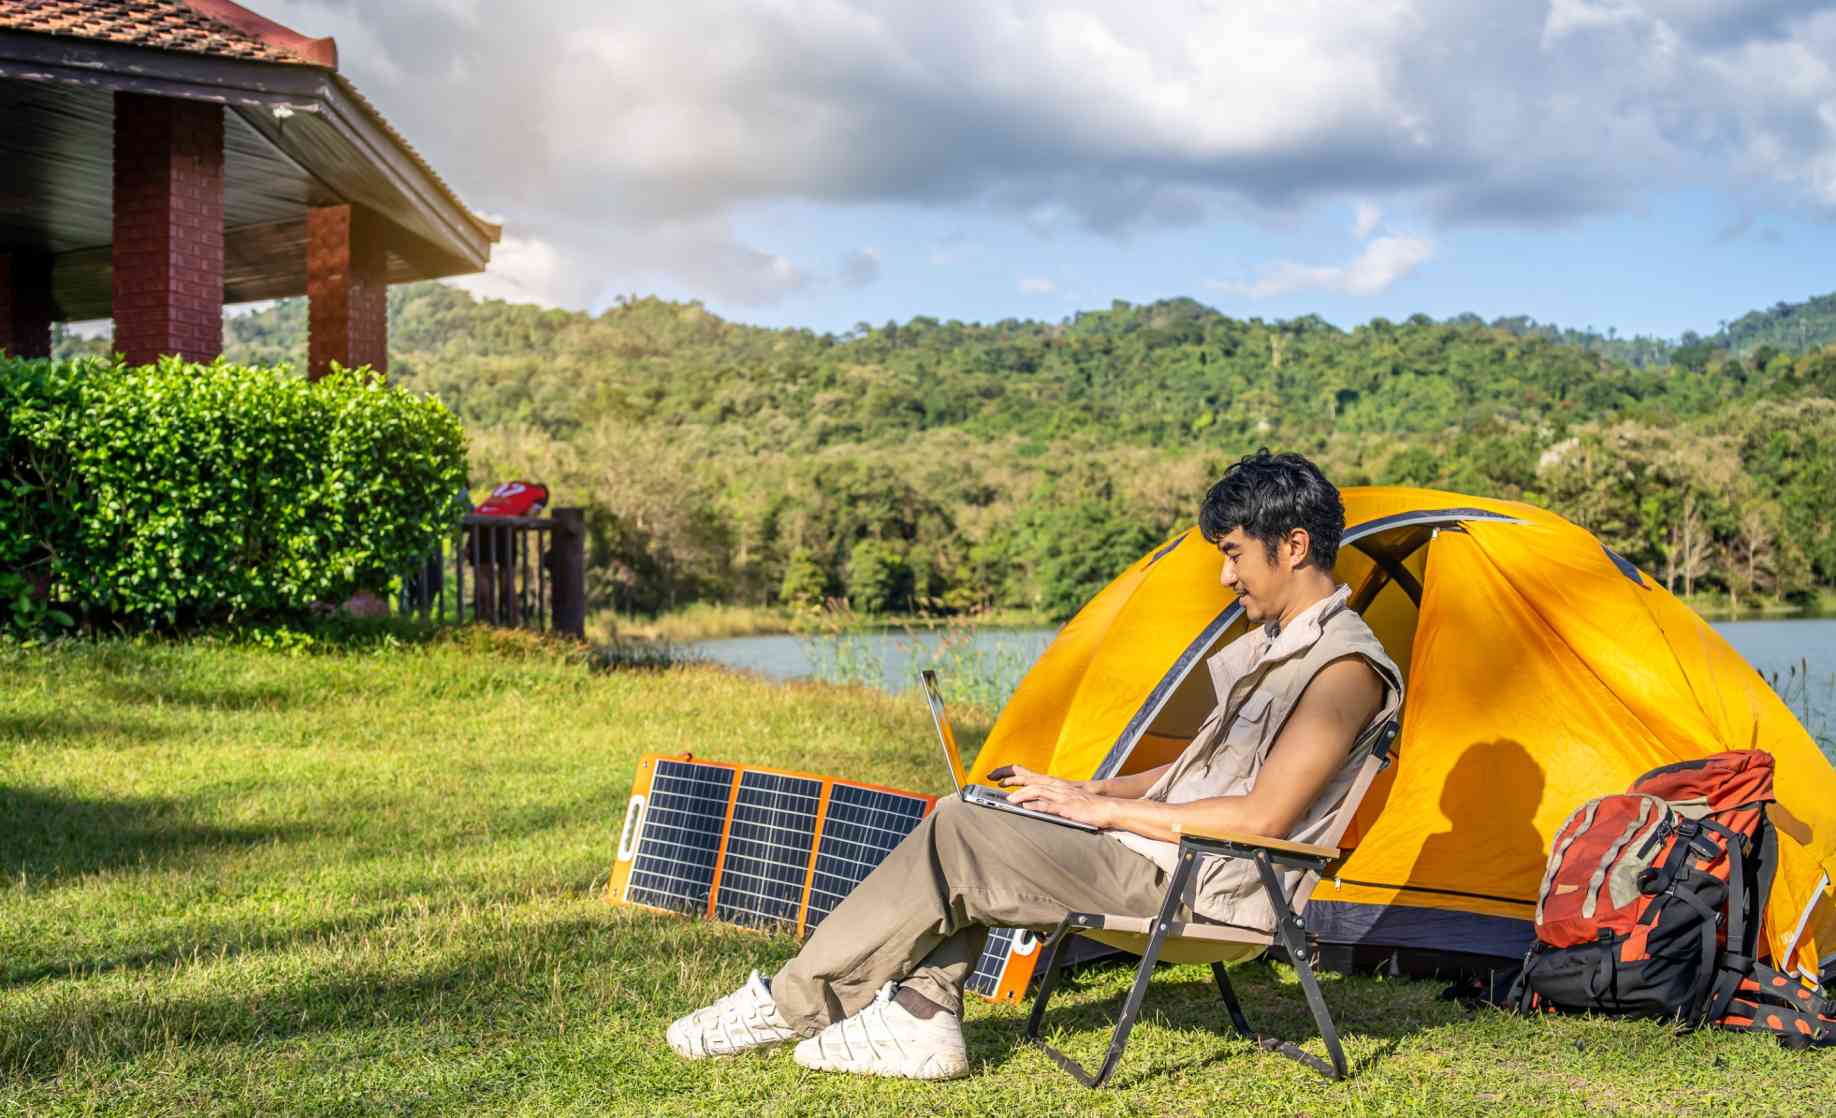 Best Solar Power Generator For Camping - How Much Power Do I Need?